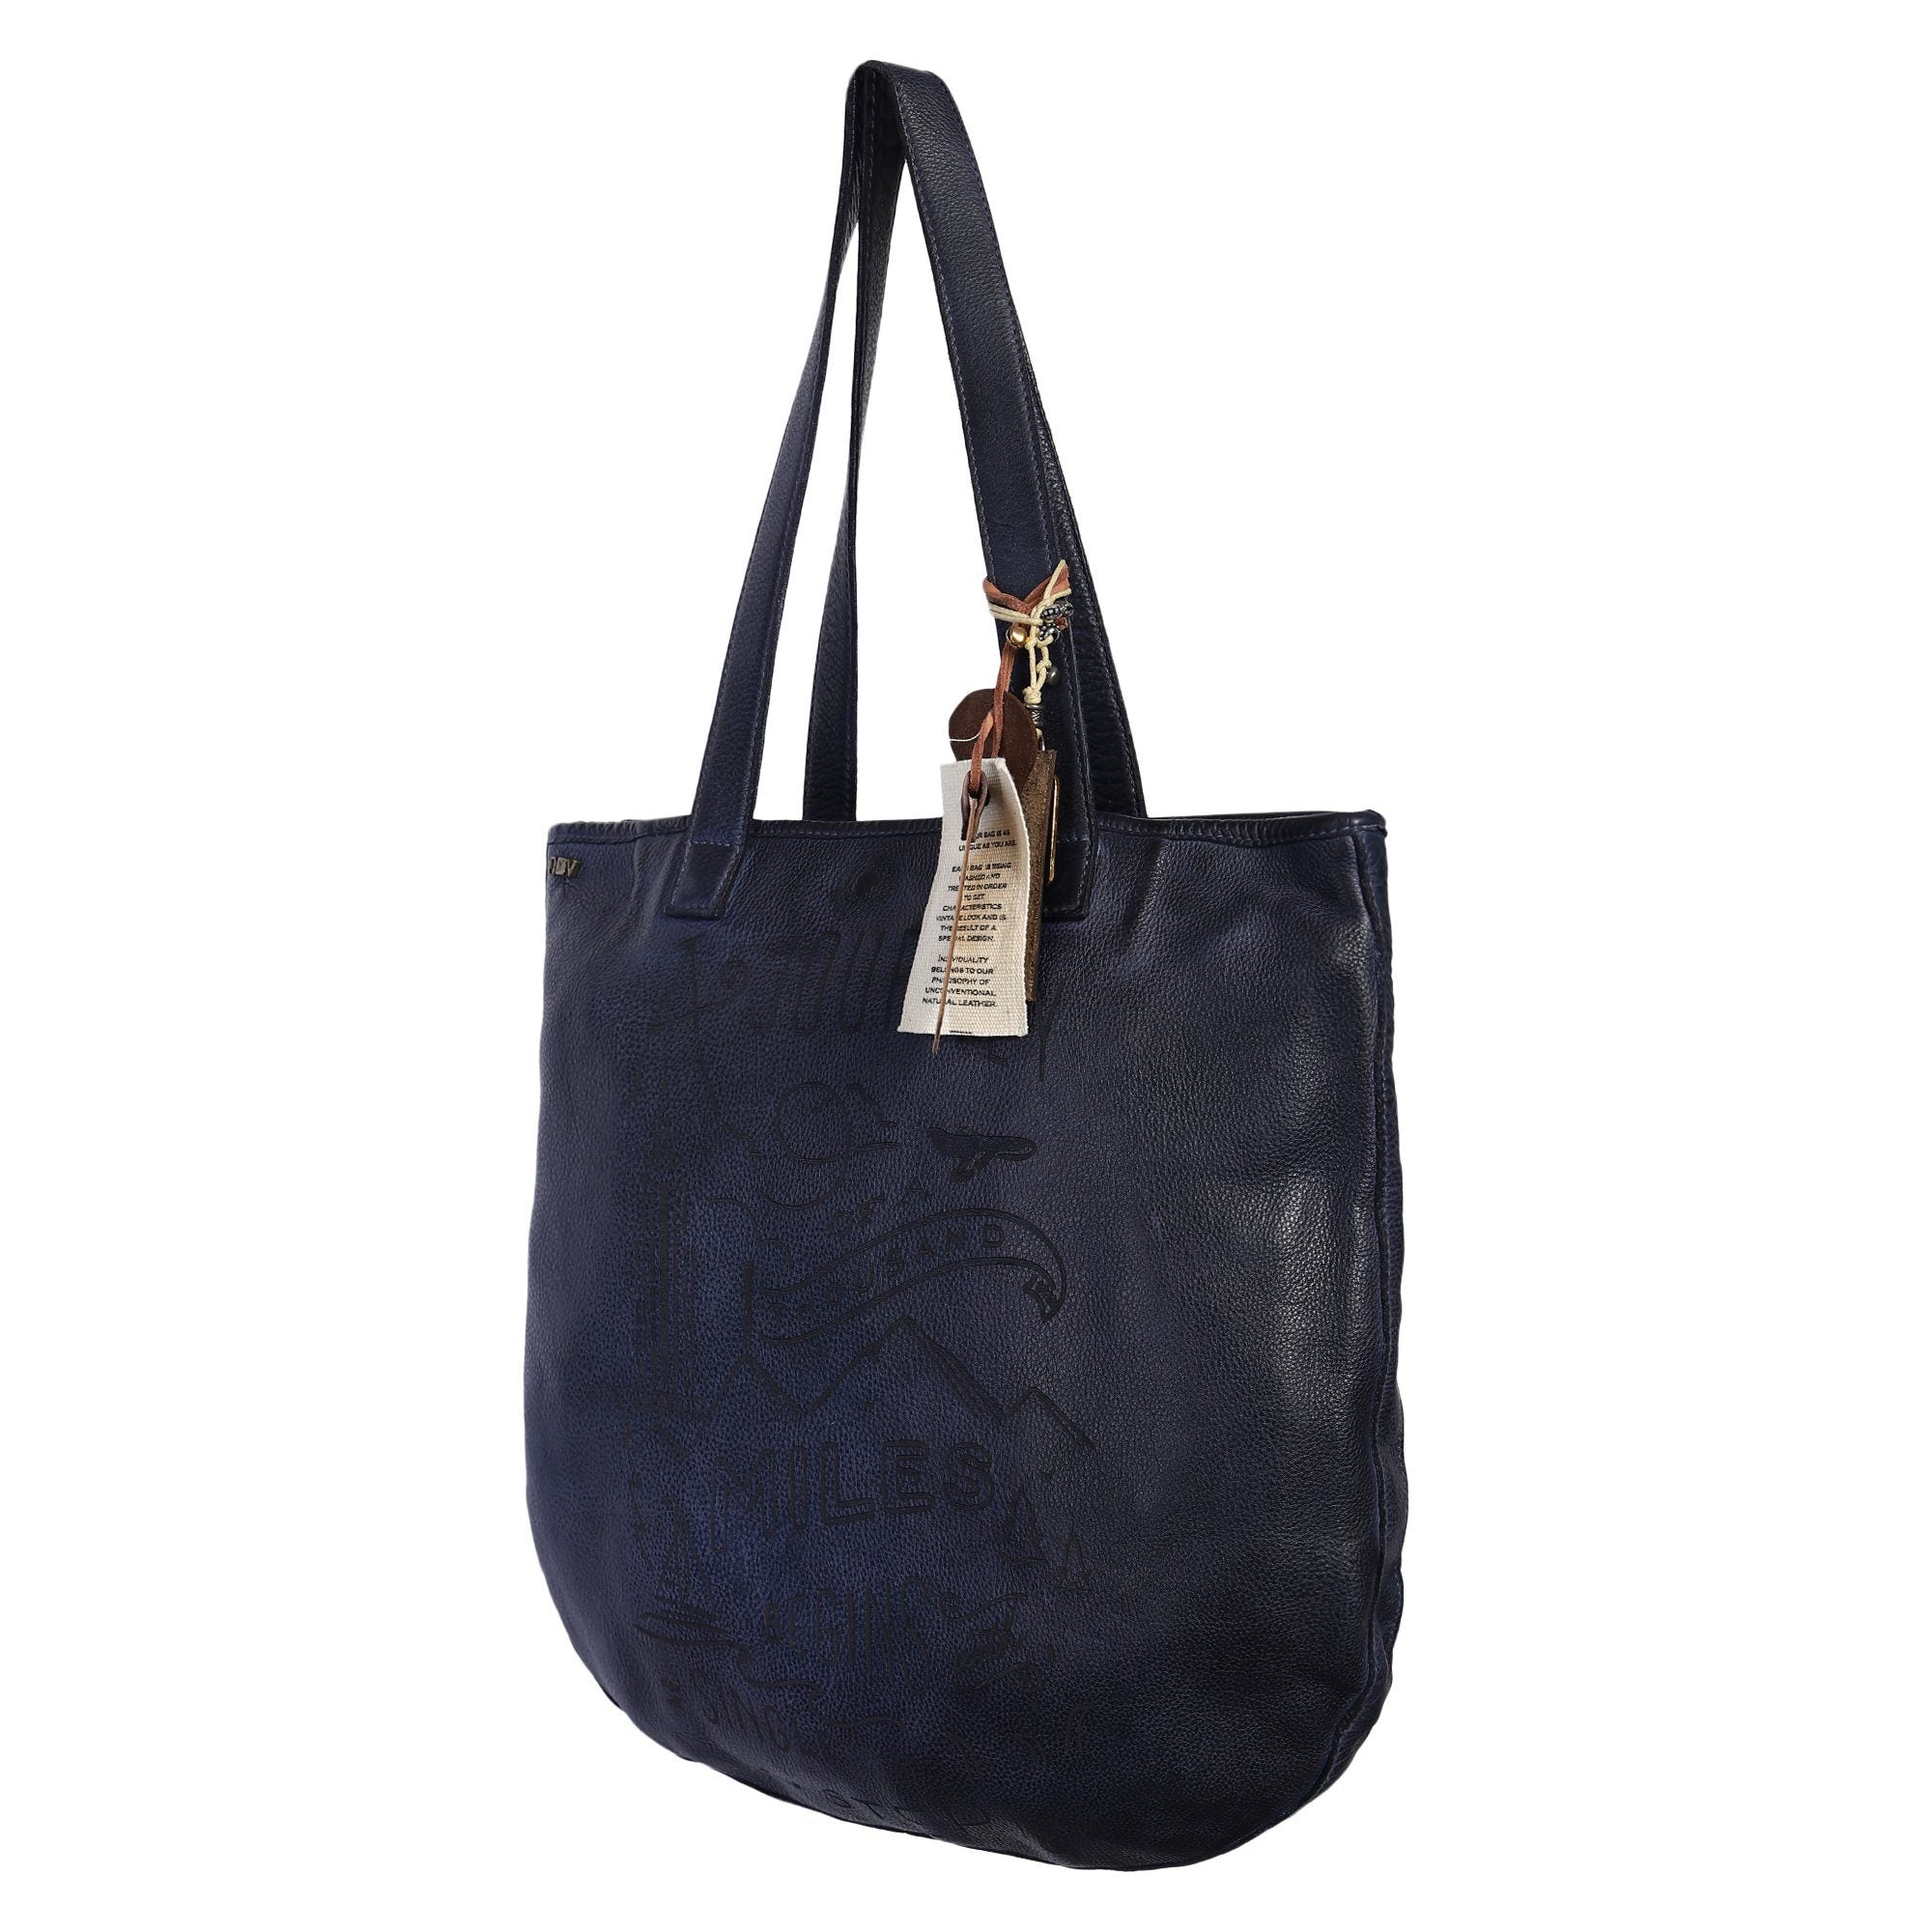 Rhoda Designer Bag: Navy blue leather shopper with lazer quote by Art N Vintage